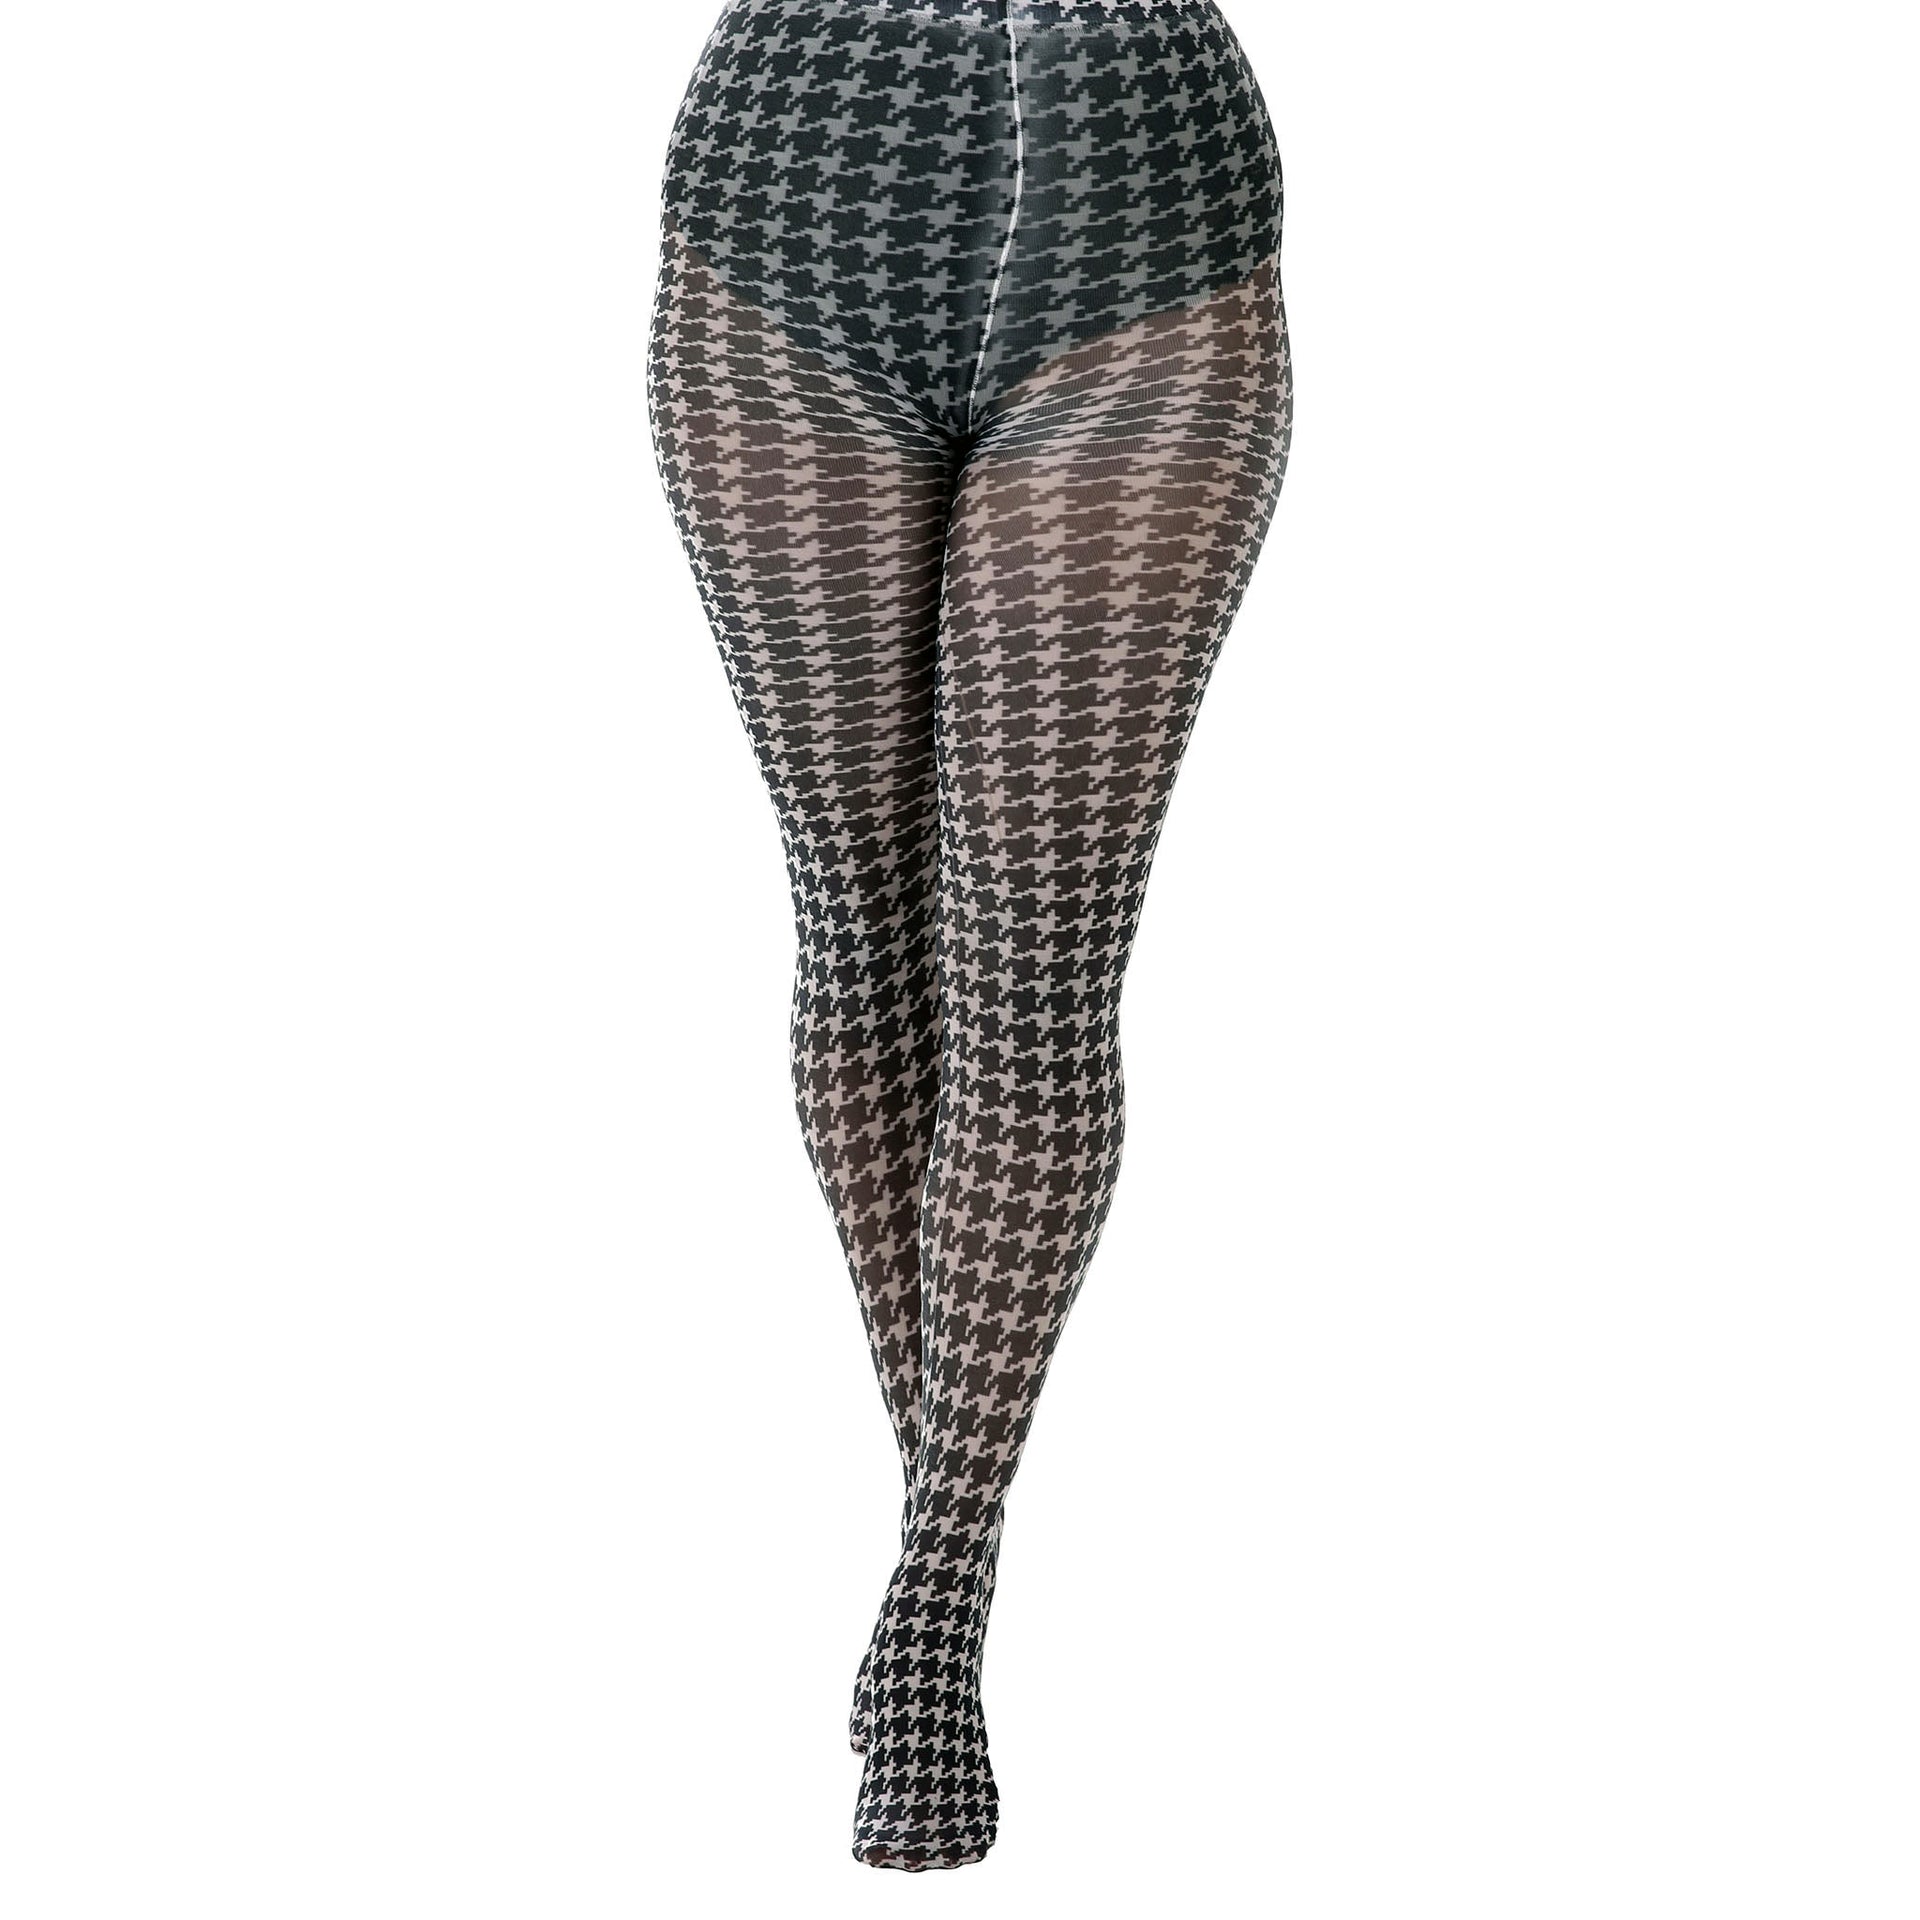 Black and White Tights and pantyhose for Women